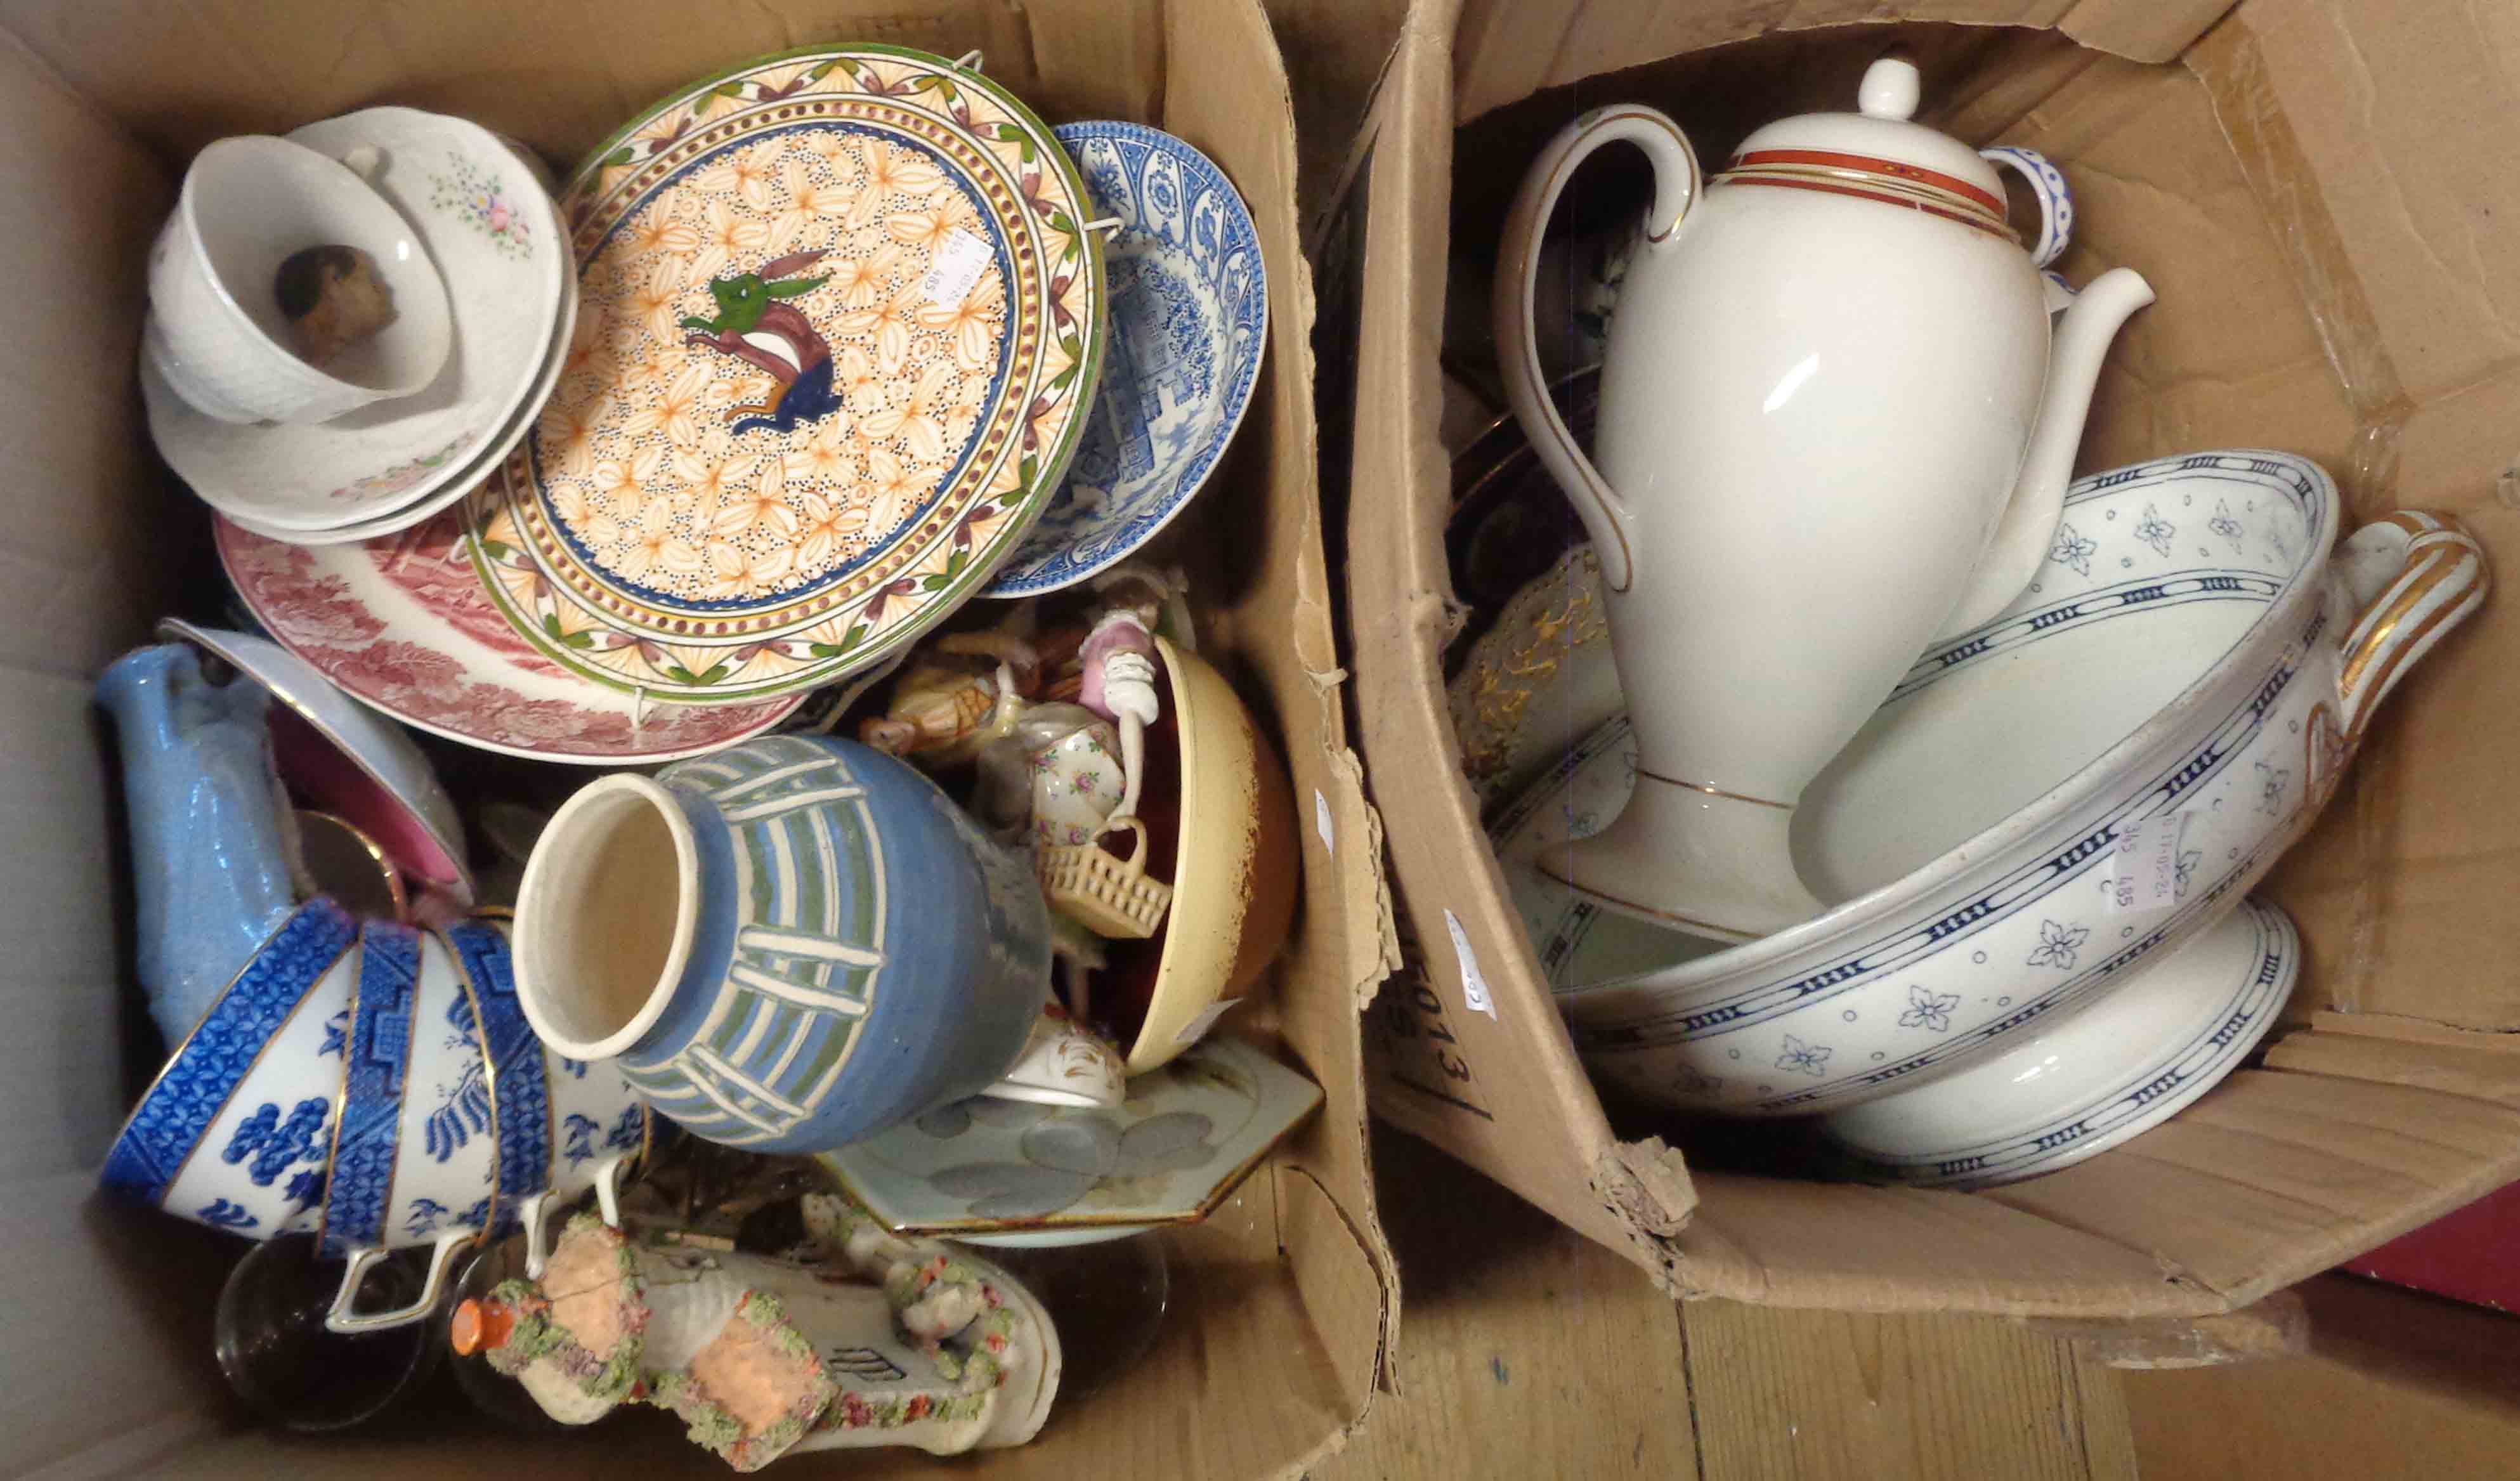 A box containing a quantity of ceramics - sold with another similar